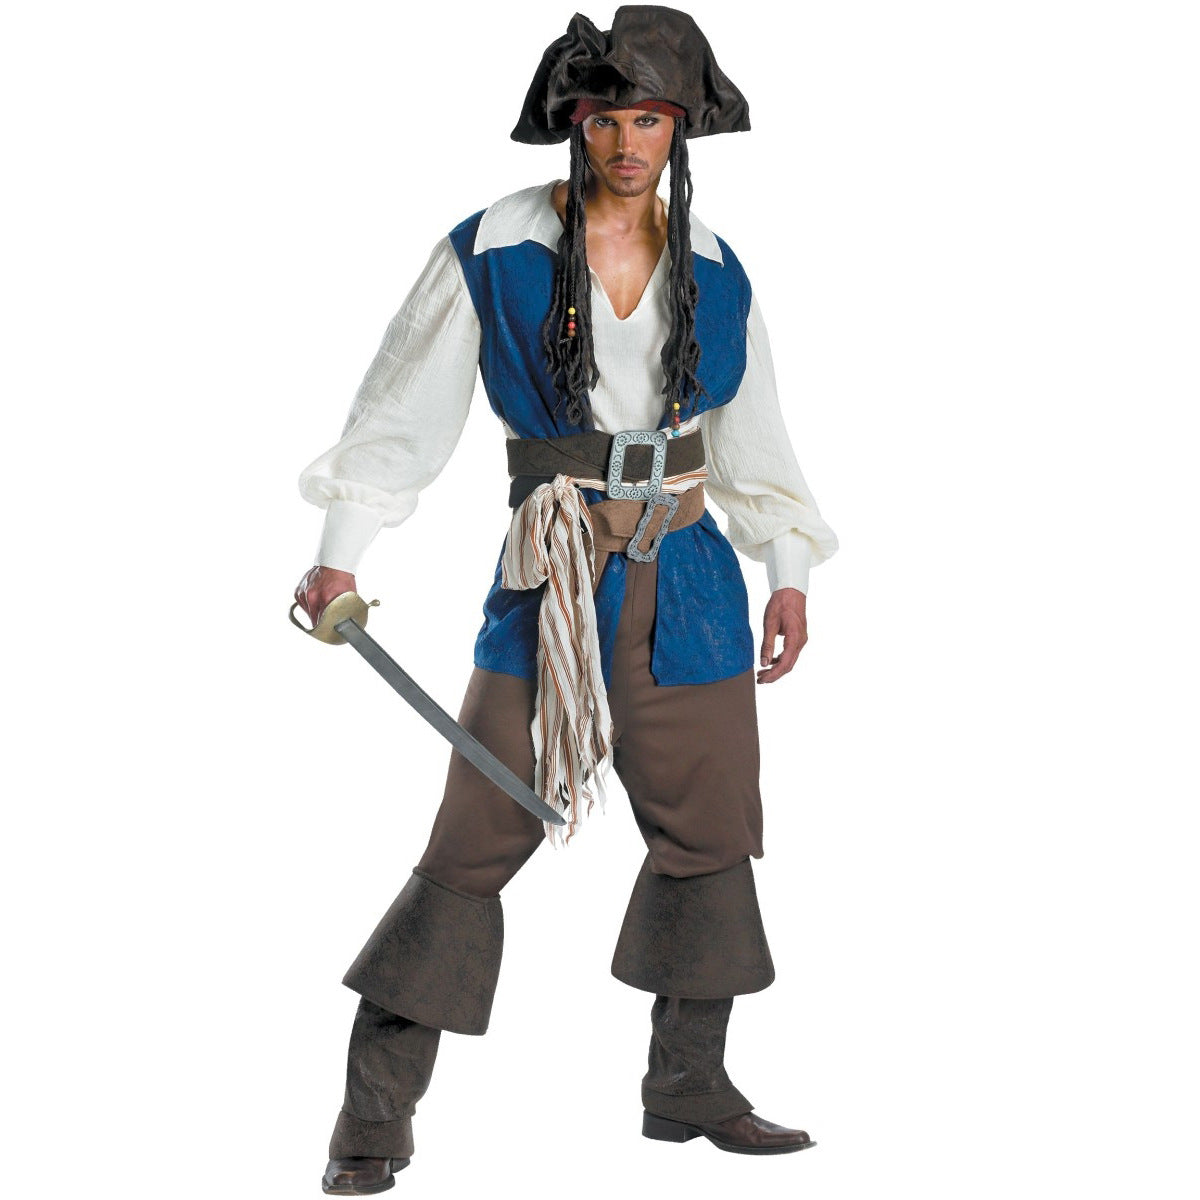 Women's & Men's & Halloween Pirate And Couple Masquerade Costumes